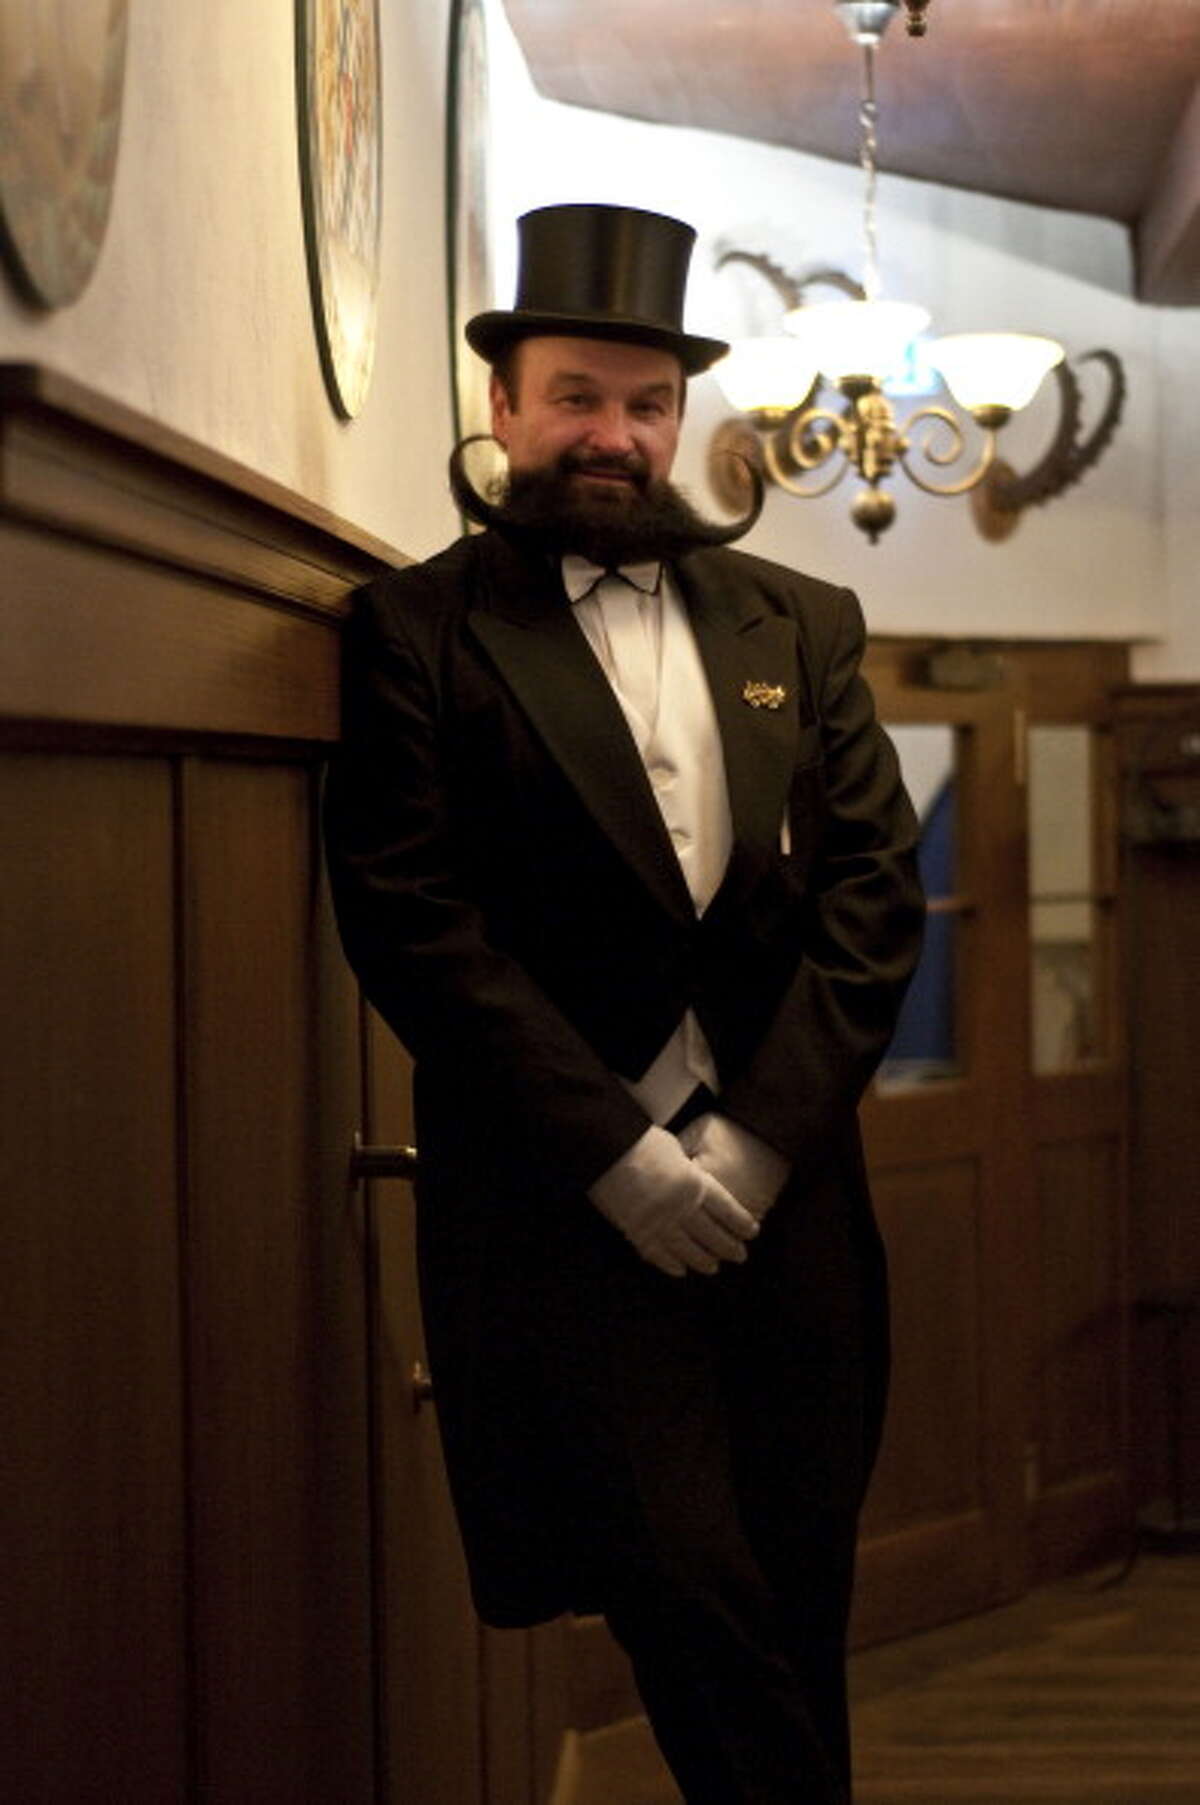 GARMISCH PARTENKIRCHEN, GERMANY - MARCH 26, 2011: Contestant of the Beard Championship held in Garmisch Partenkirchen posing in tailcoat and tophat, Germany.